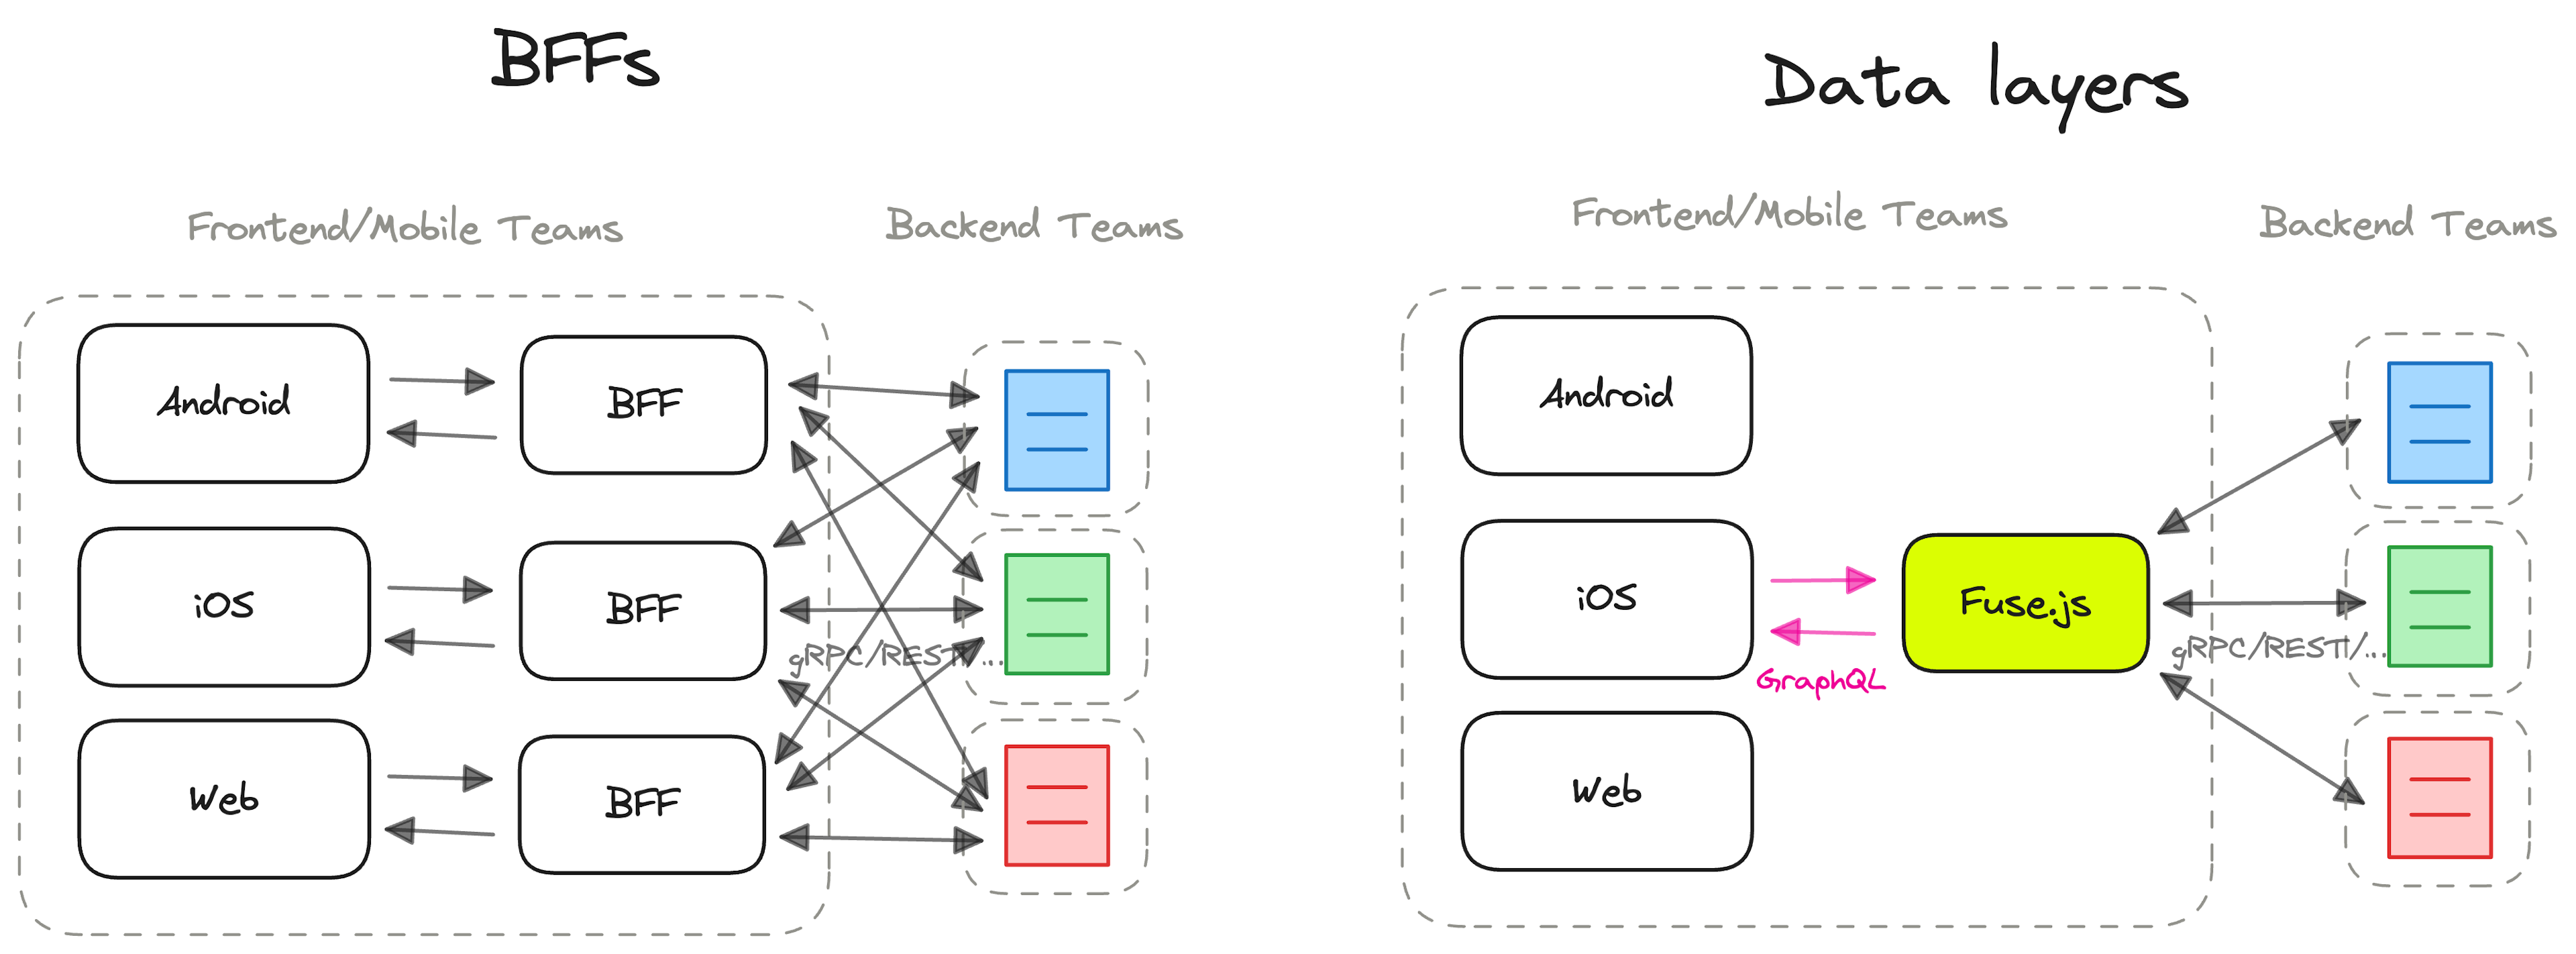 This shows on the left the classic workflow where we have boxes representing 'mobile', 'iOS' and 'web' development teams. These boxes all individually connect to their own BFF box which in turn connect to all the datasources of the backend teams. On the right we have the 'fuse' diagram where all the frontend teams connect to a node called 'fuse' which in turn connects all backend datasources.